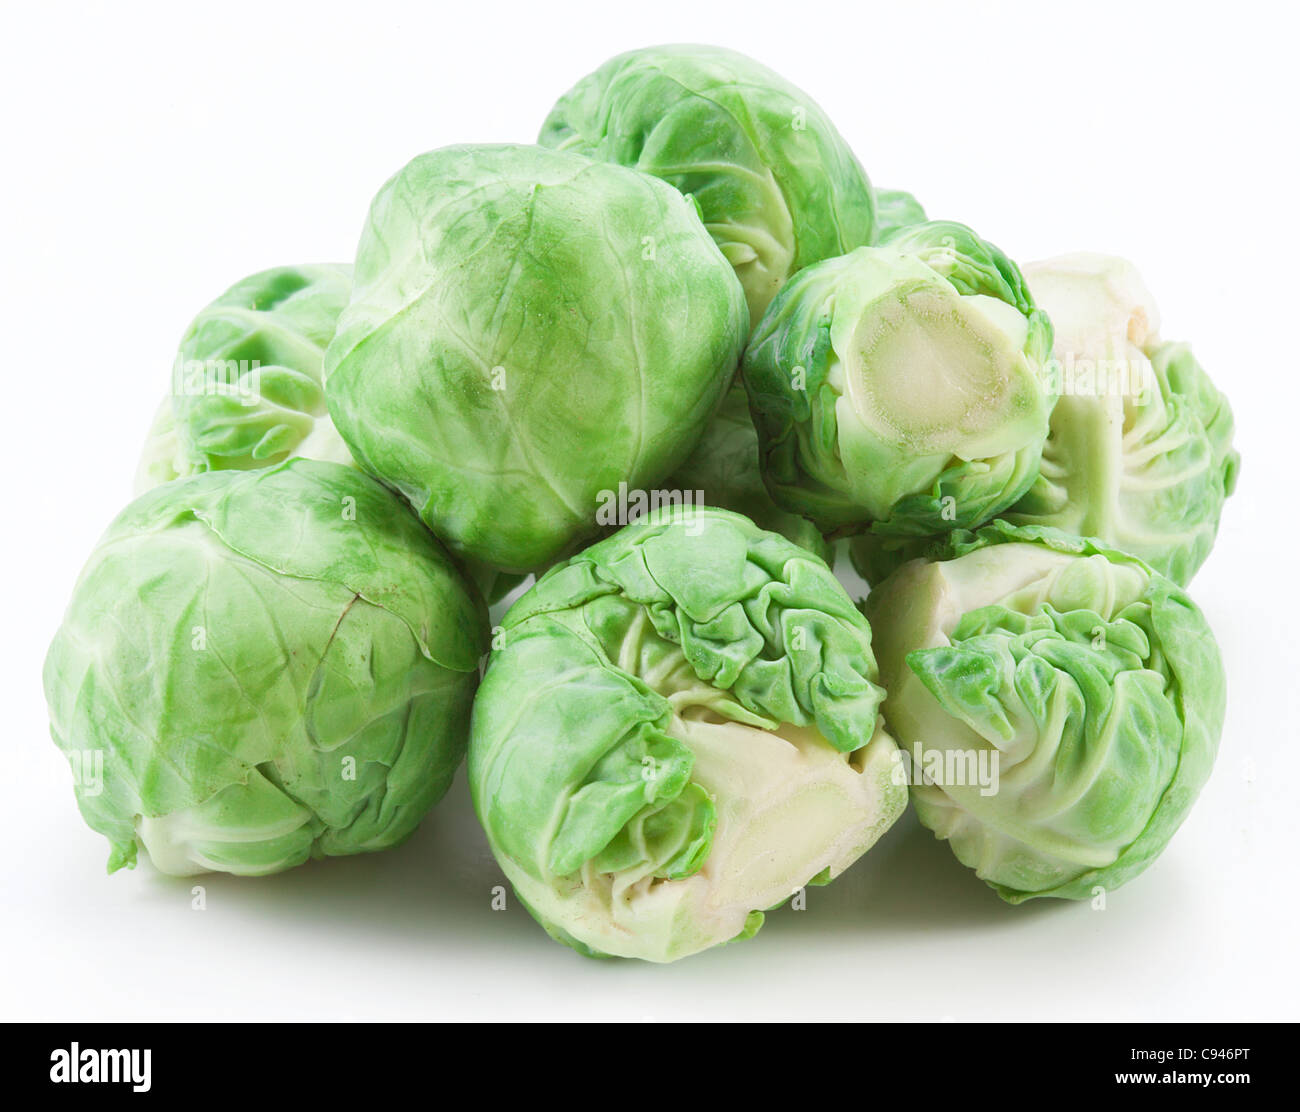 Lot of brussels sprouts isolated on a white background. Stock Photo